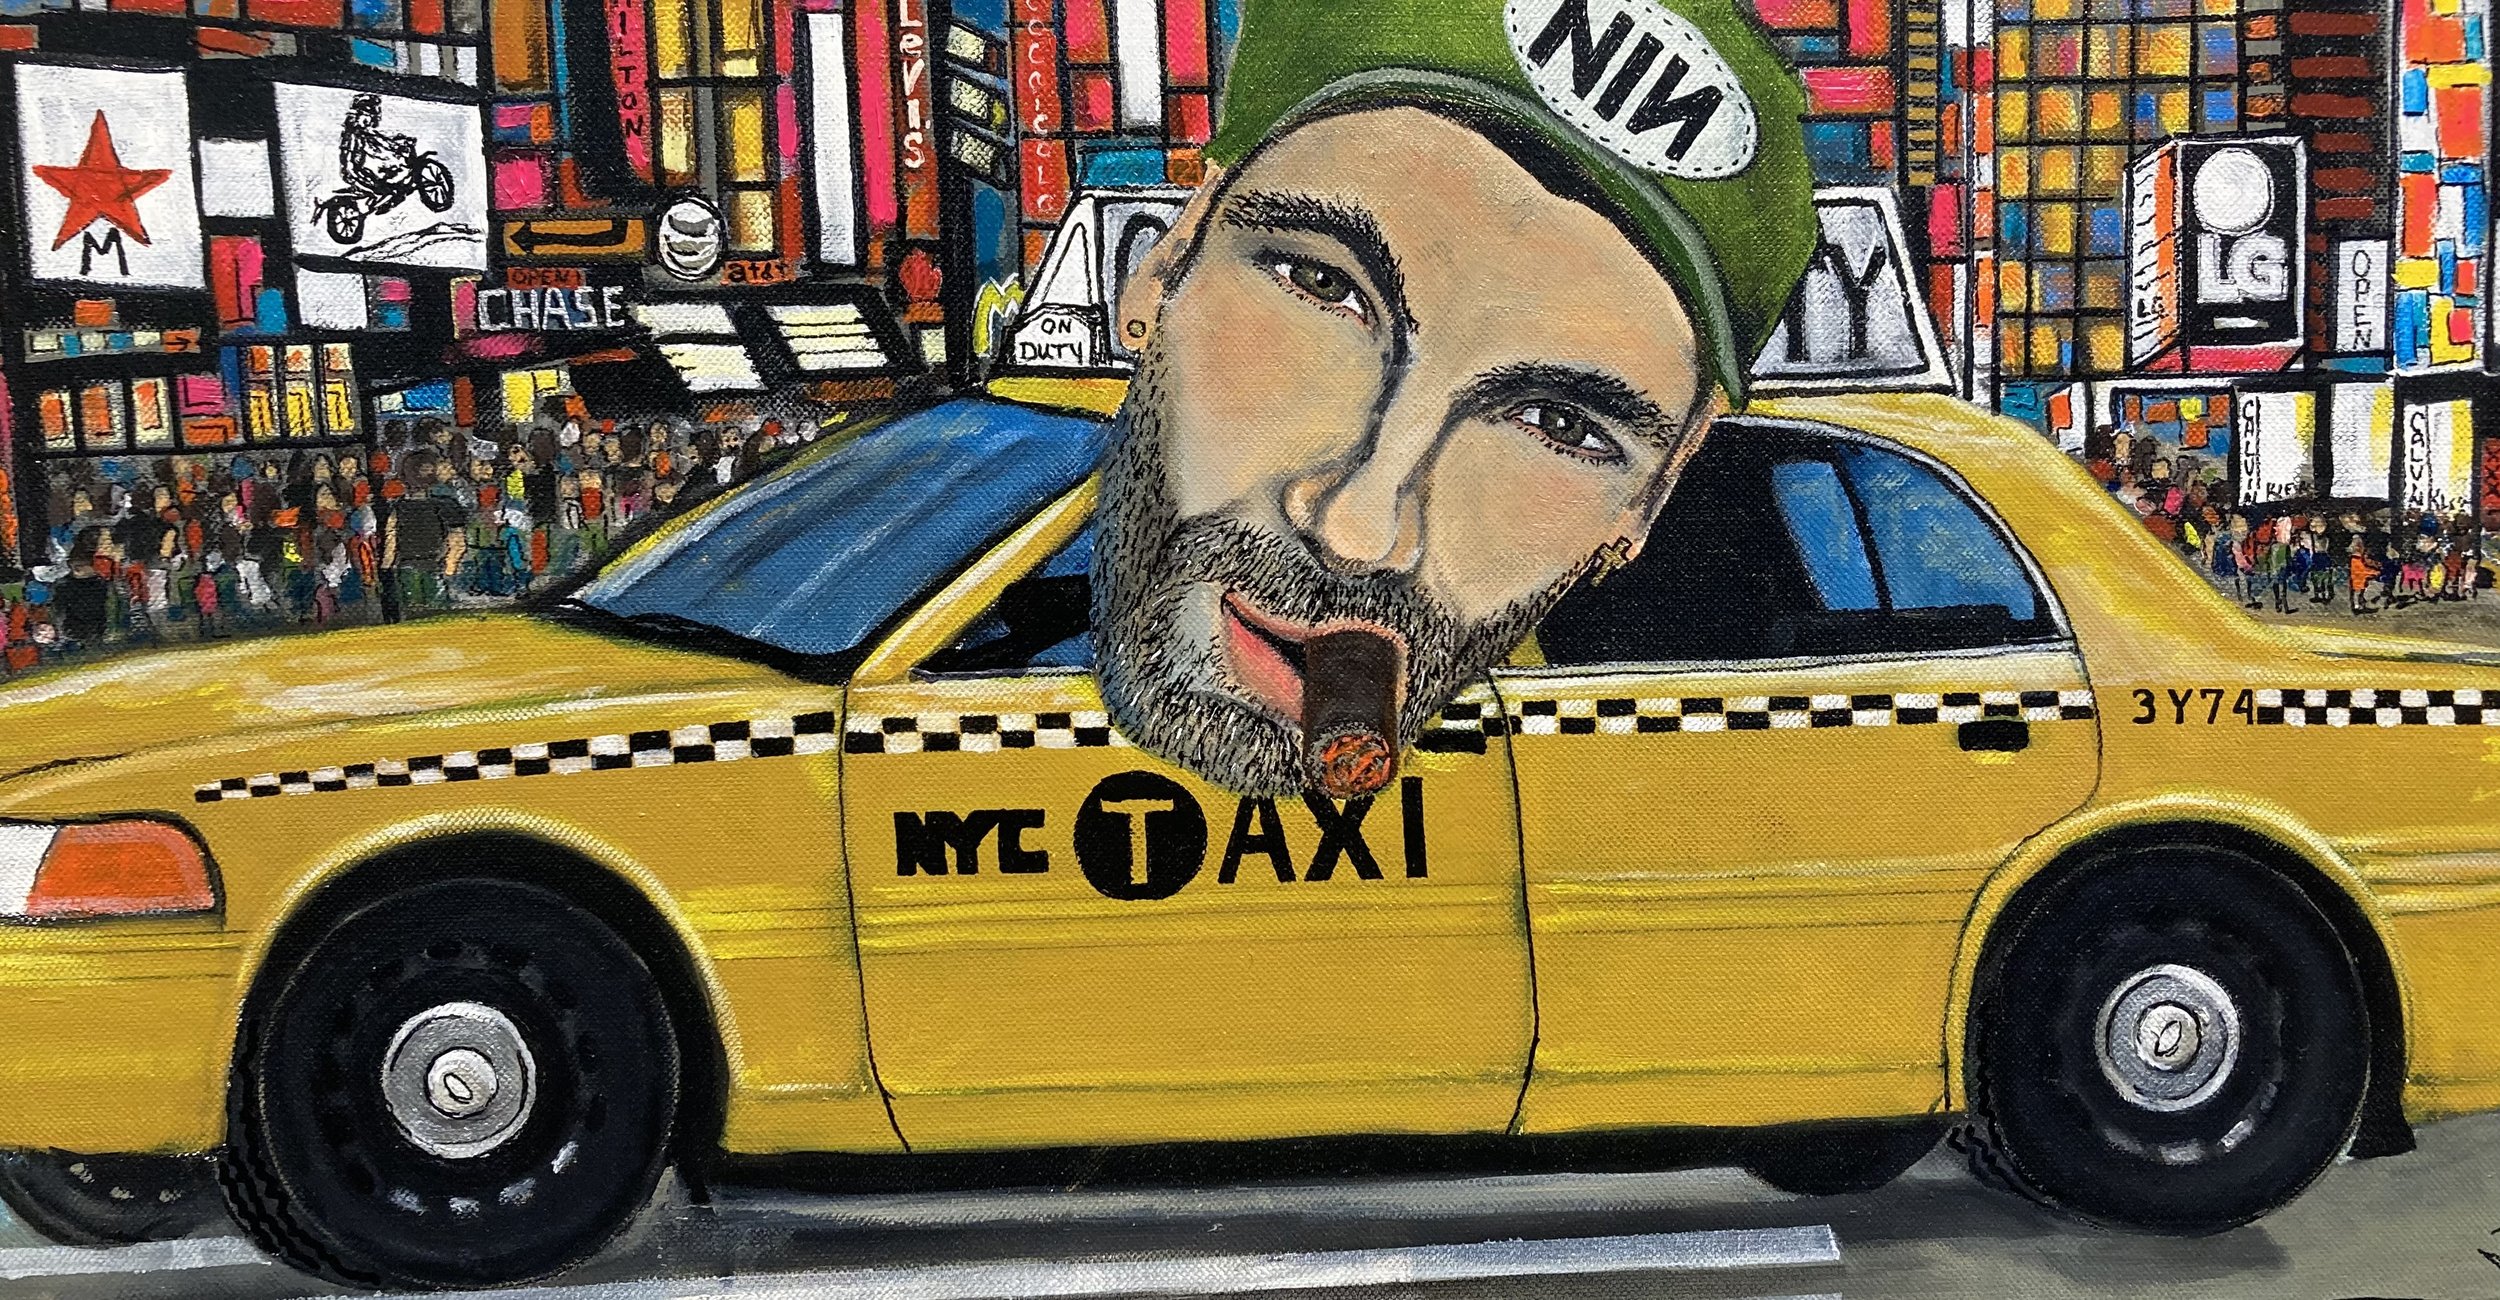 Hot Taxi and Fast Men #1 by Marty Wiess ( 2022 President's Show Icons Honorable Mention Recepient) .jpg